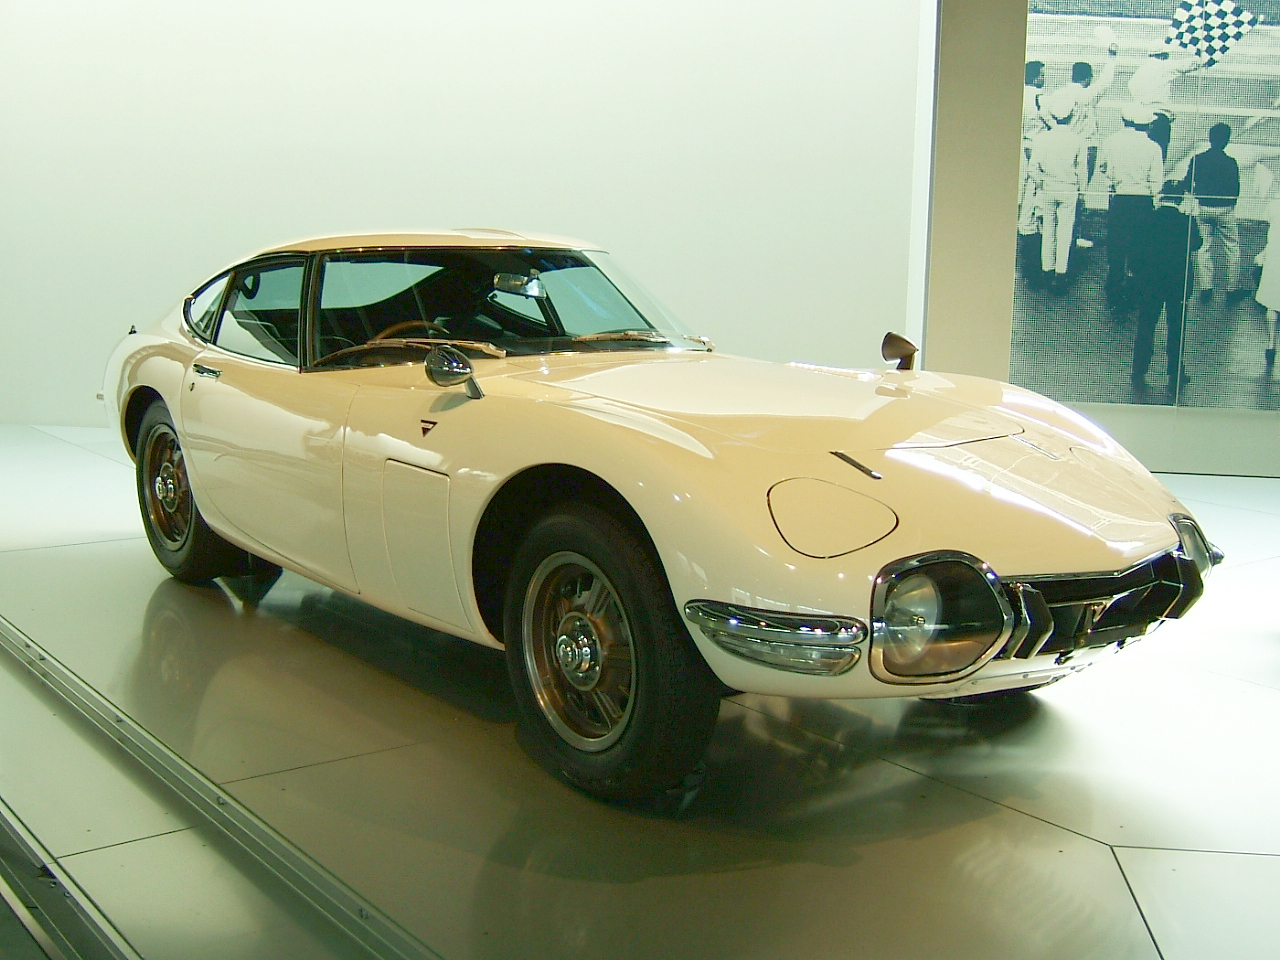 The Toyota 2000GT: An Iconic Roadster with a Rich History.